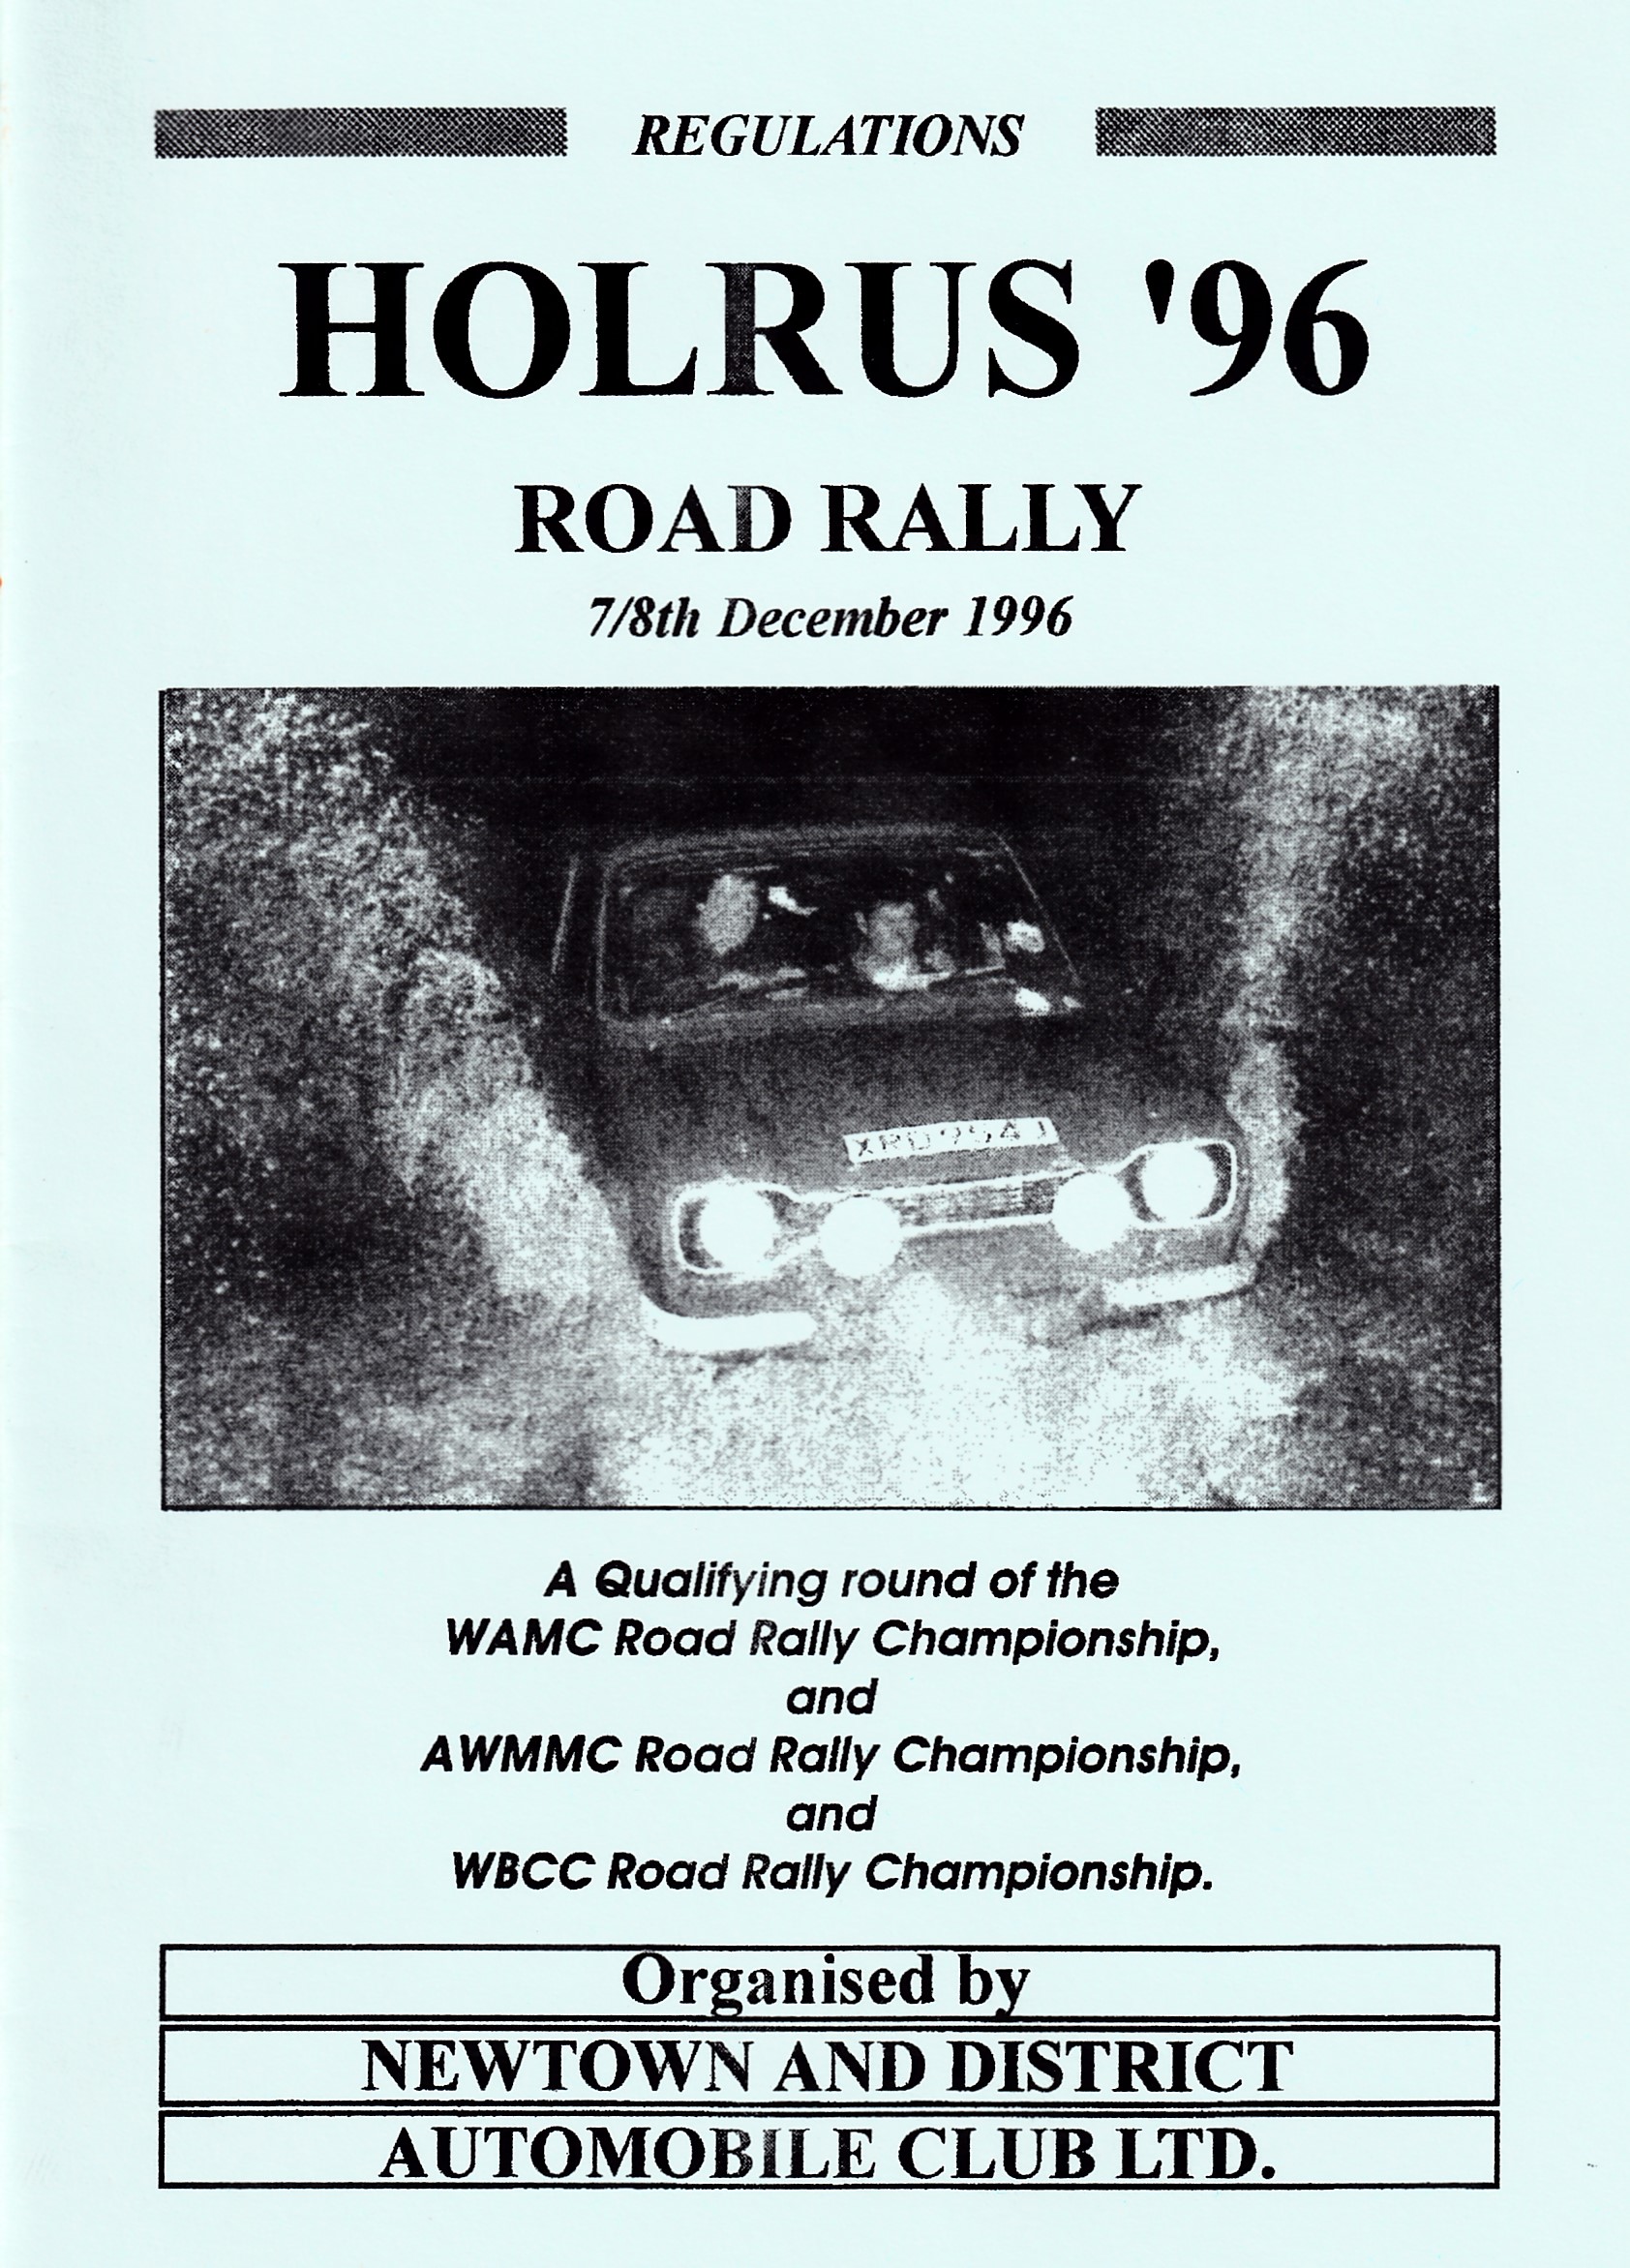 Holrus '96 Road Rally